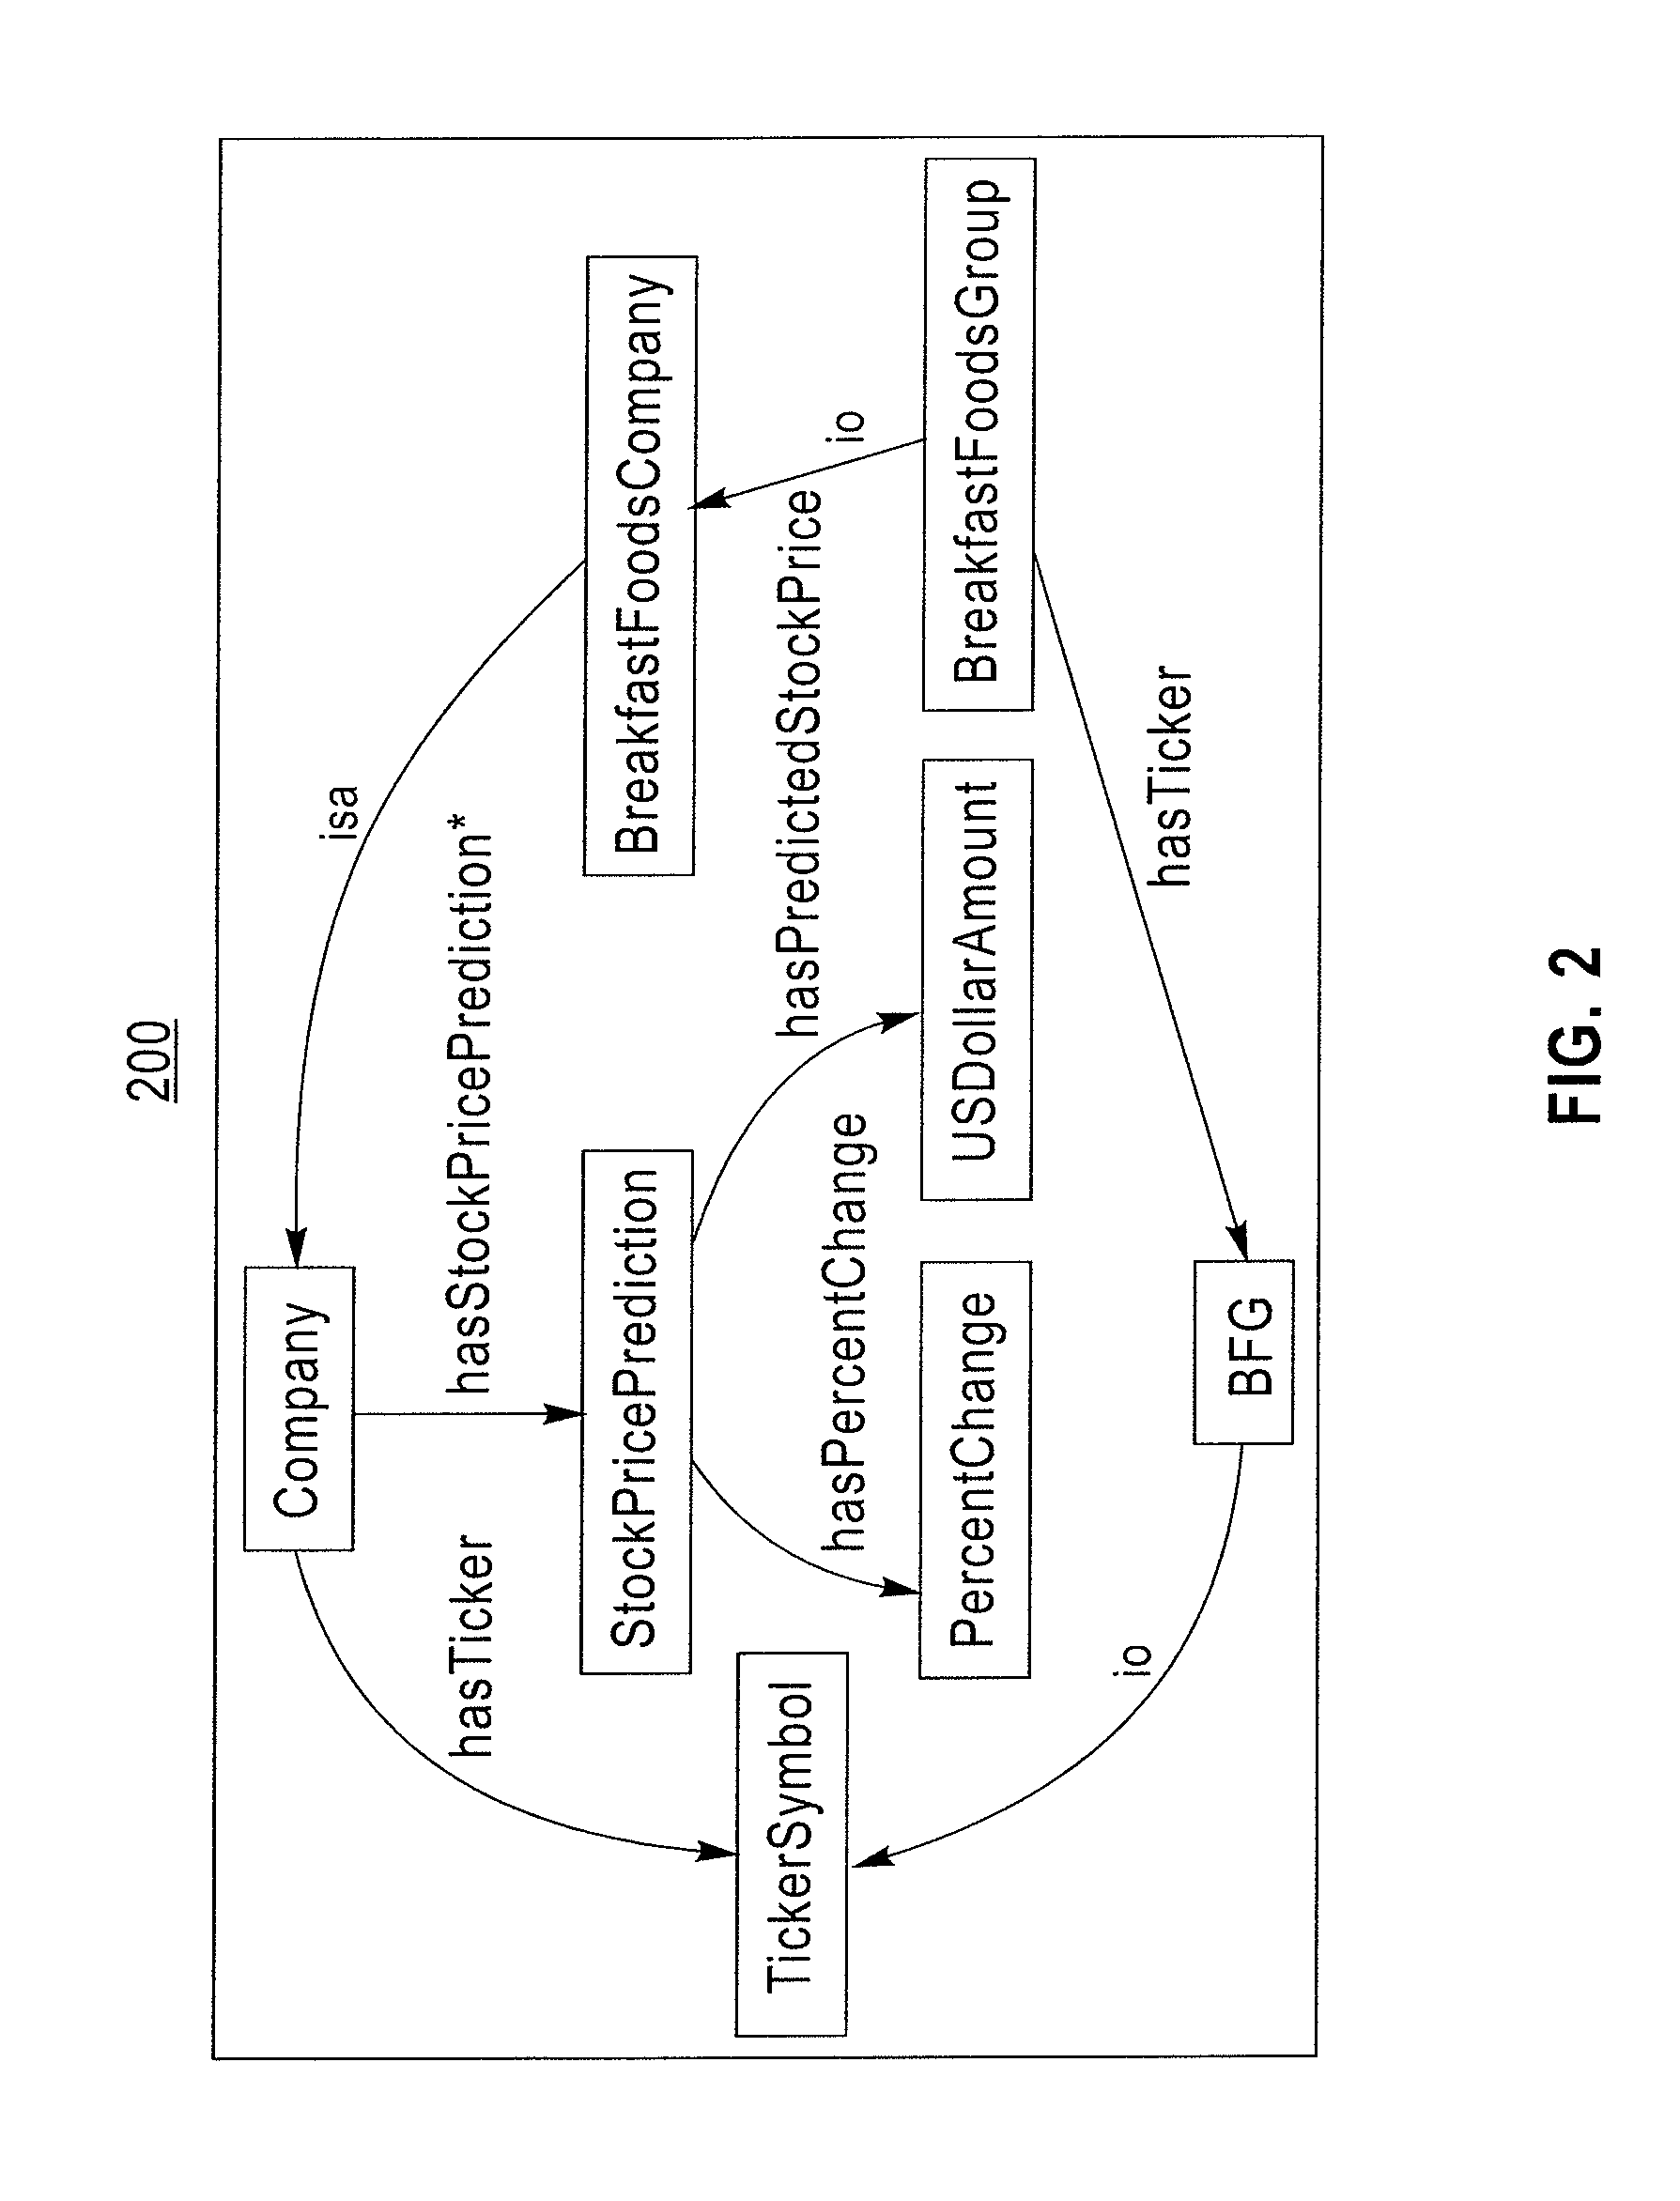 Method and system for composing stream processing applications according to a semantic description of a processing goal